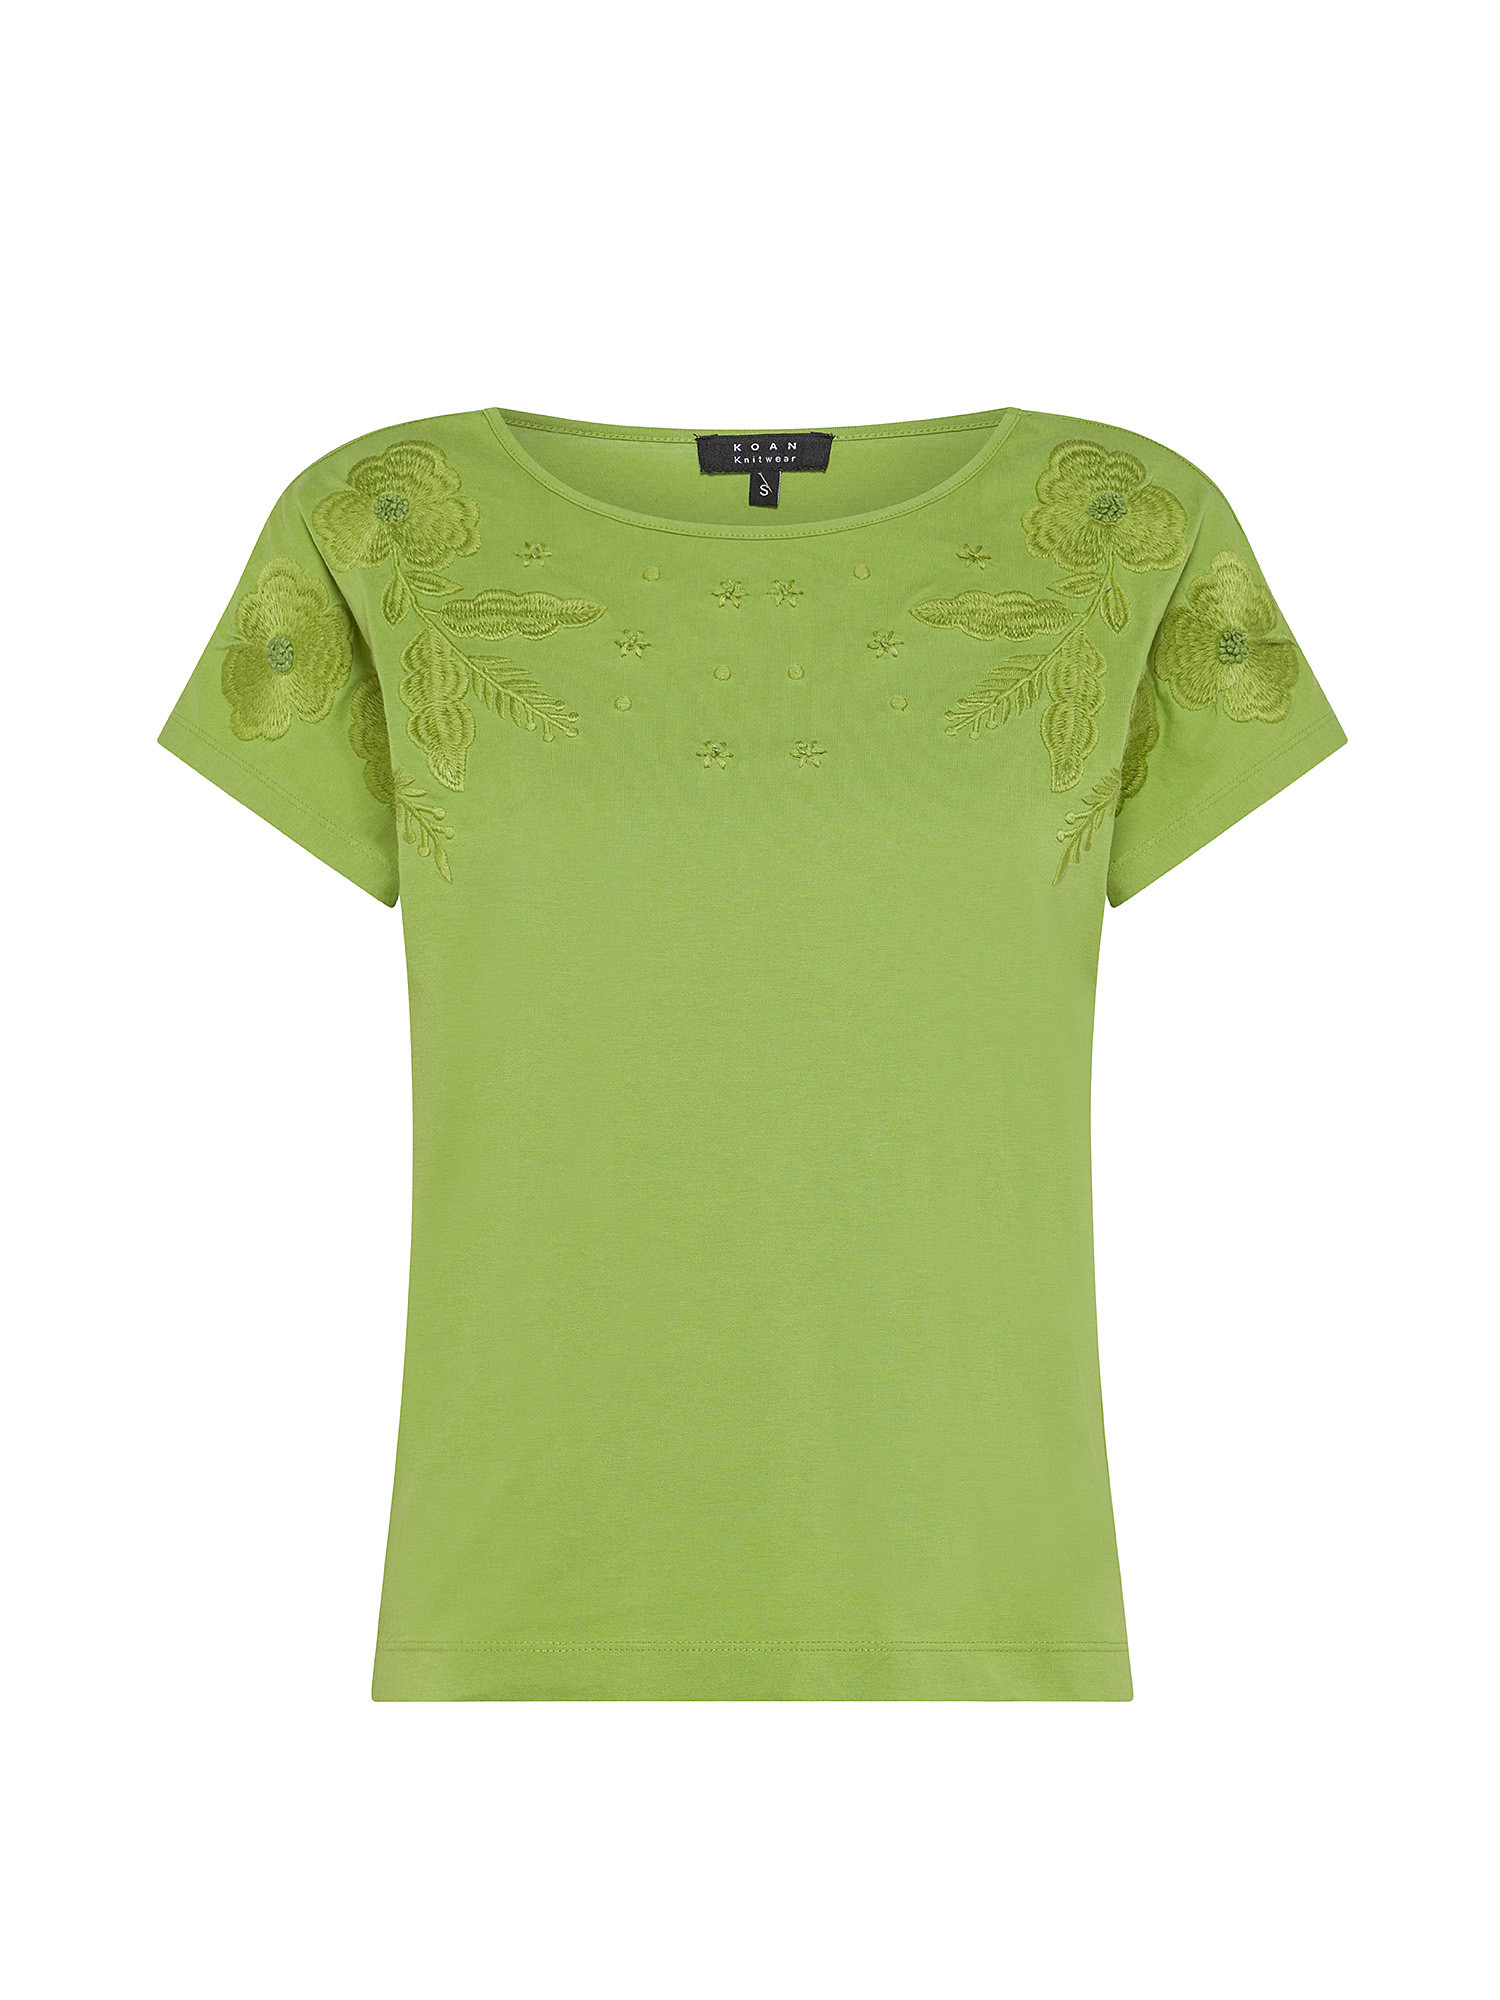 Koan - T-shirt with embroidery, Green, large image number 0